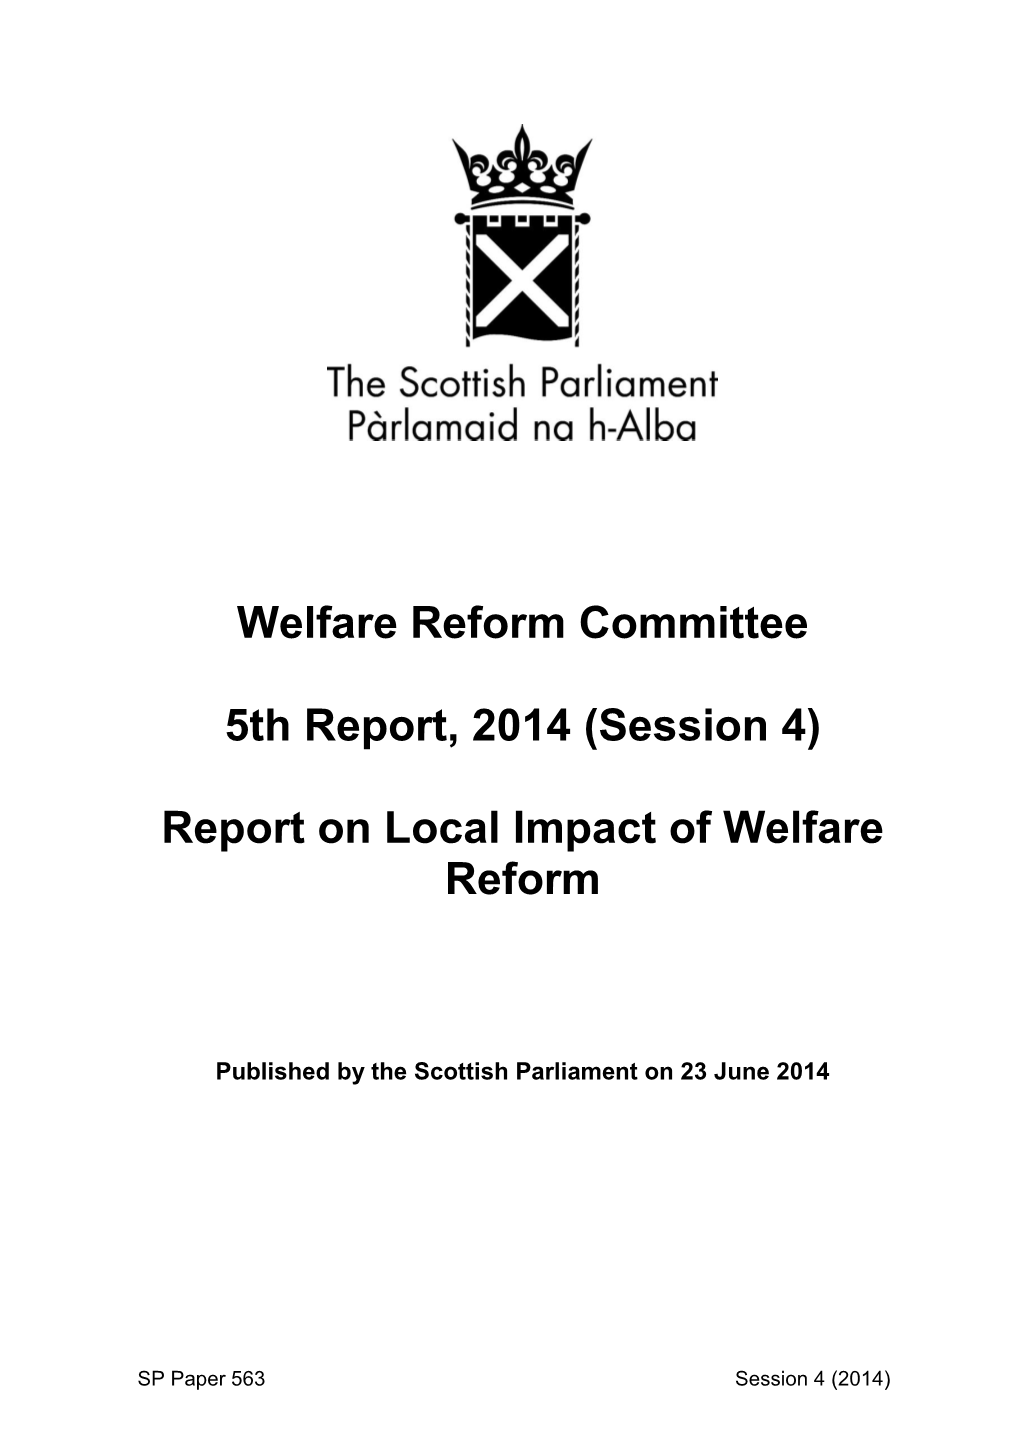 The Local Impact of Welfare Reform from the Centre for Regional Economic and Social Research at Sheffield Hallam University